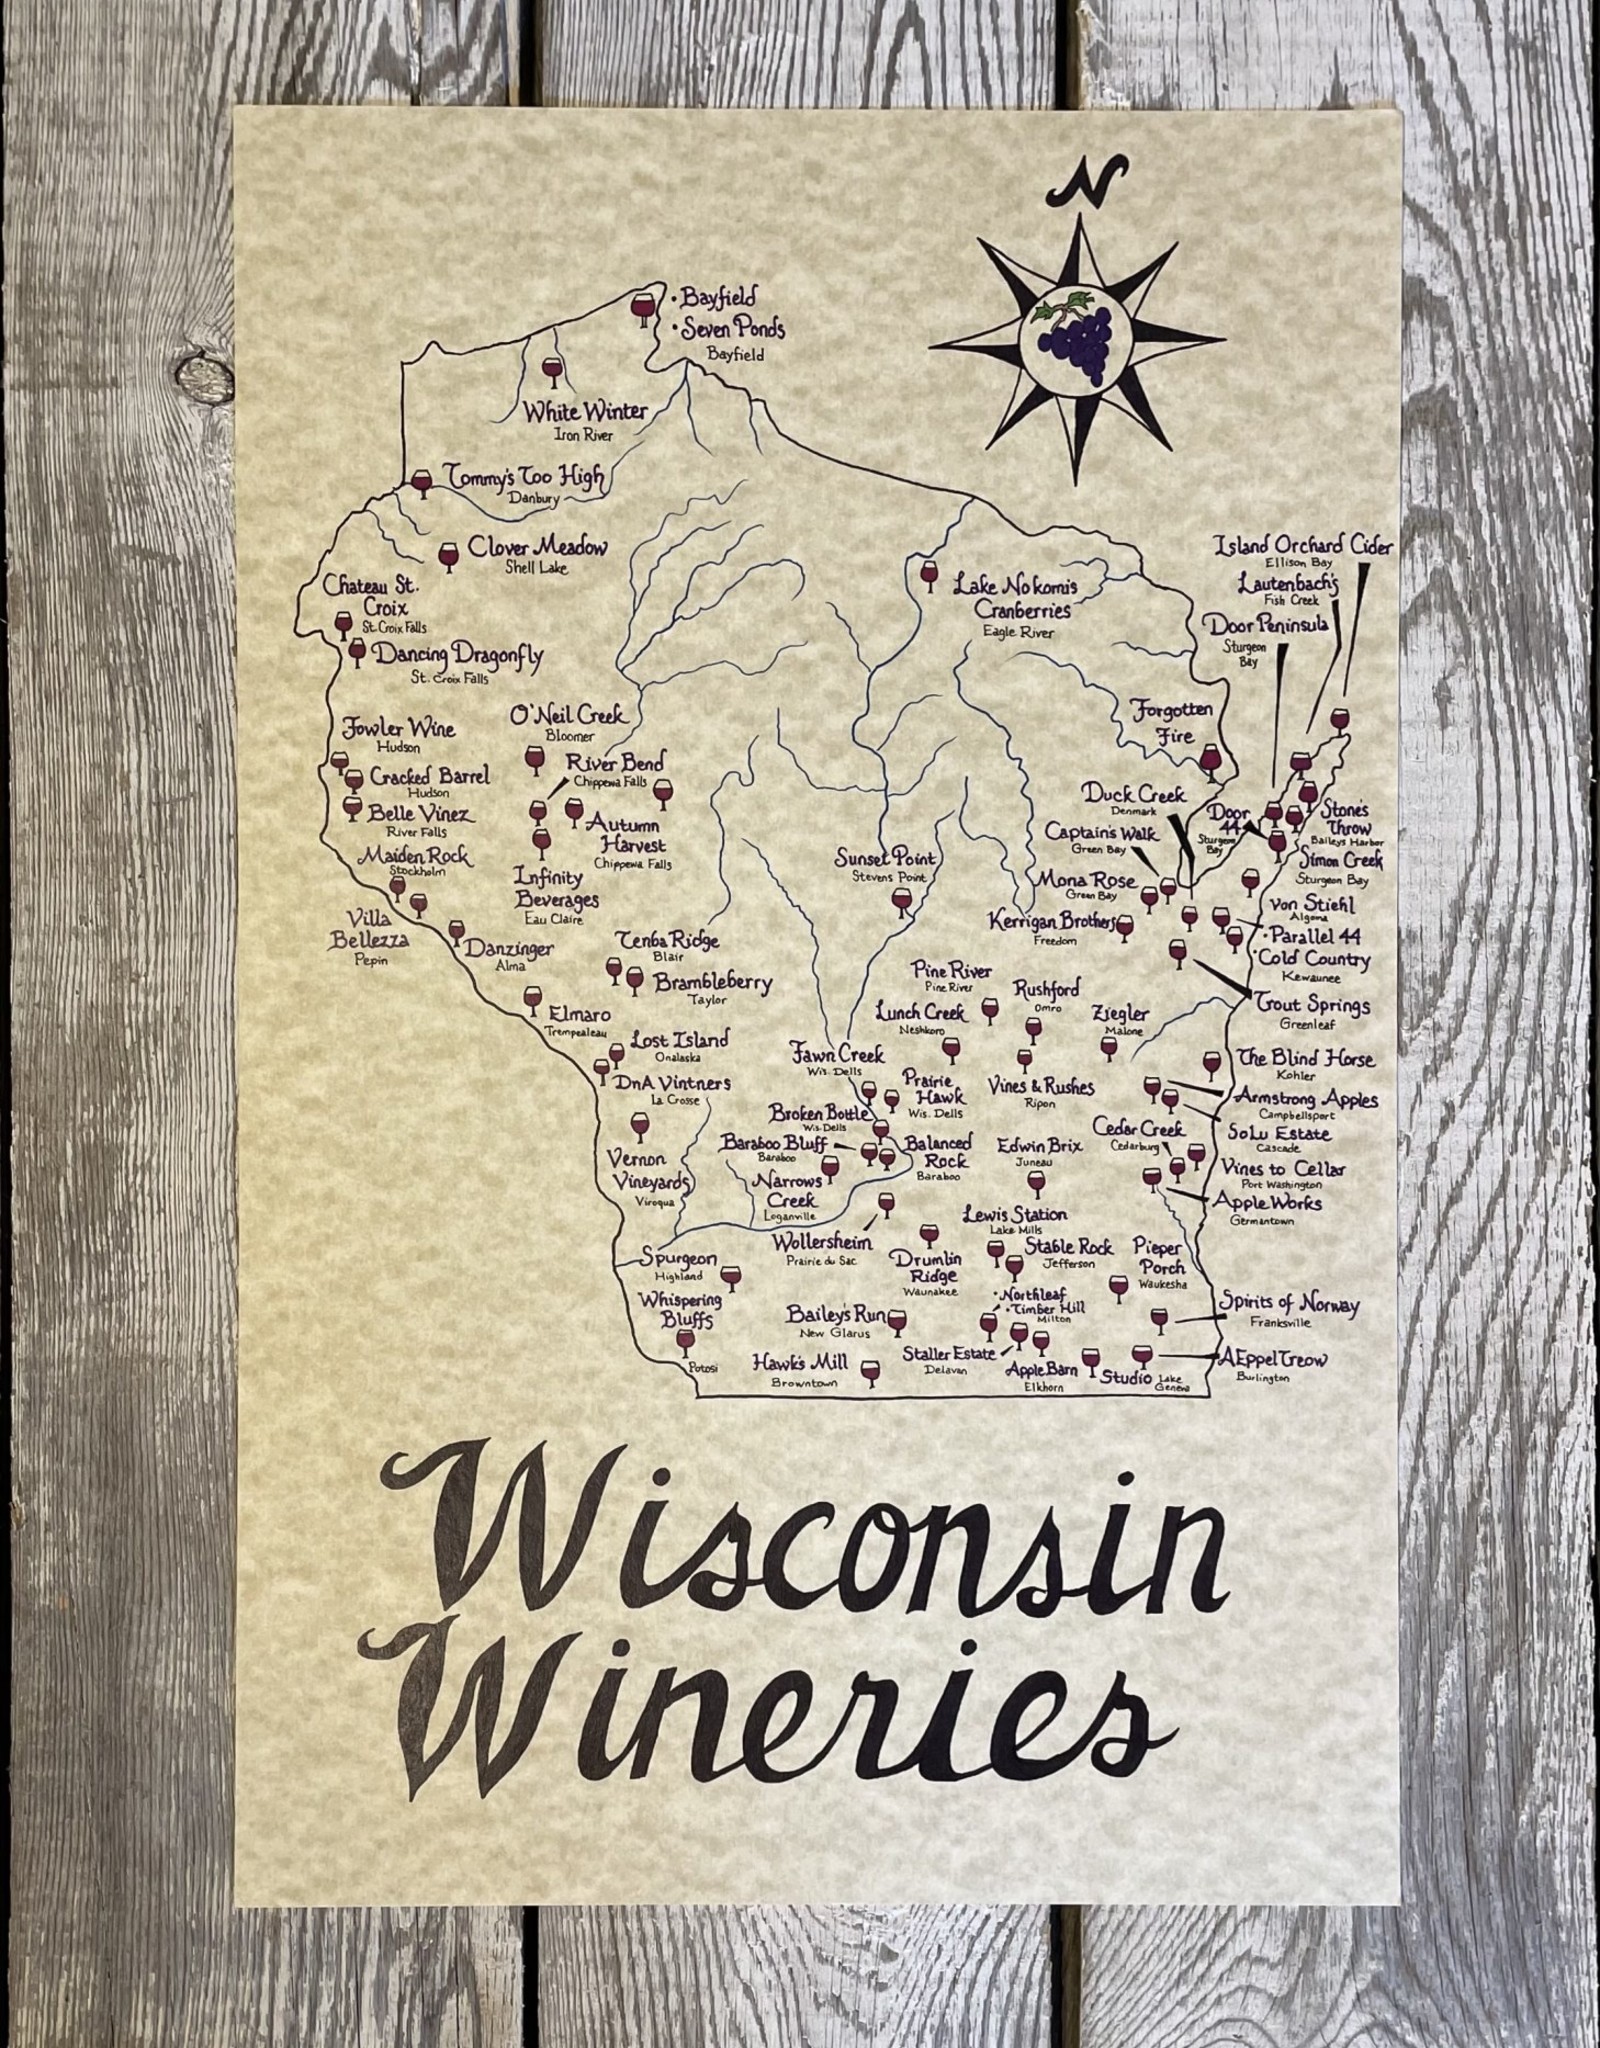 Mediaeval Mapmaker Wisconsin Wineries Hand Drawn Parchment Map